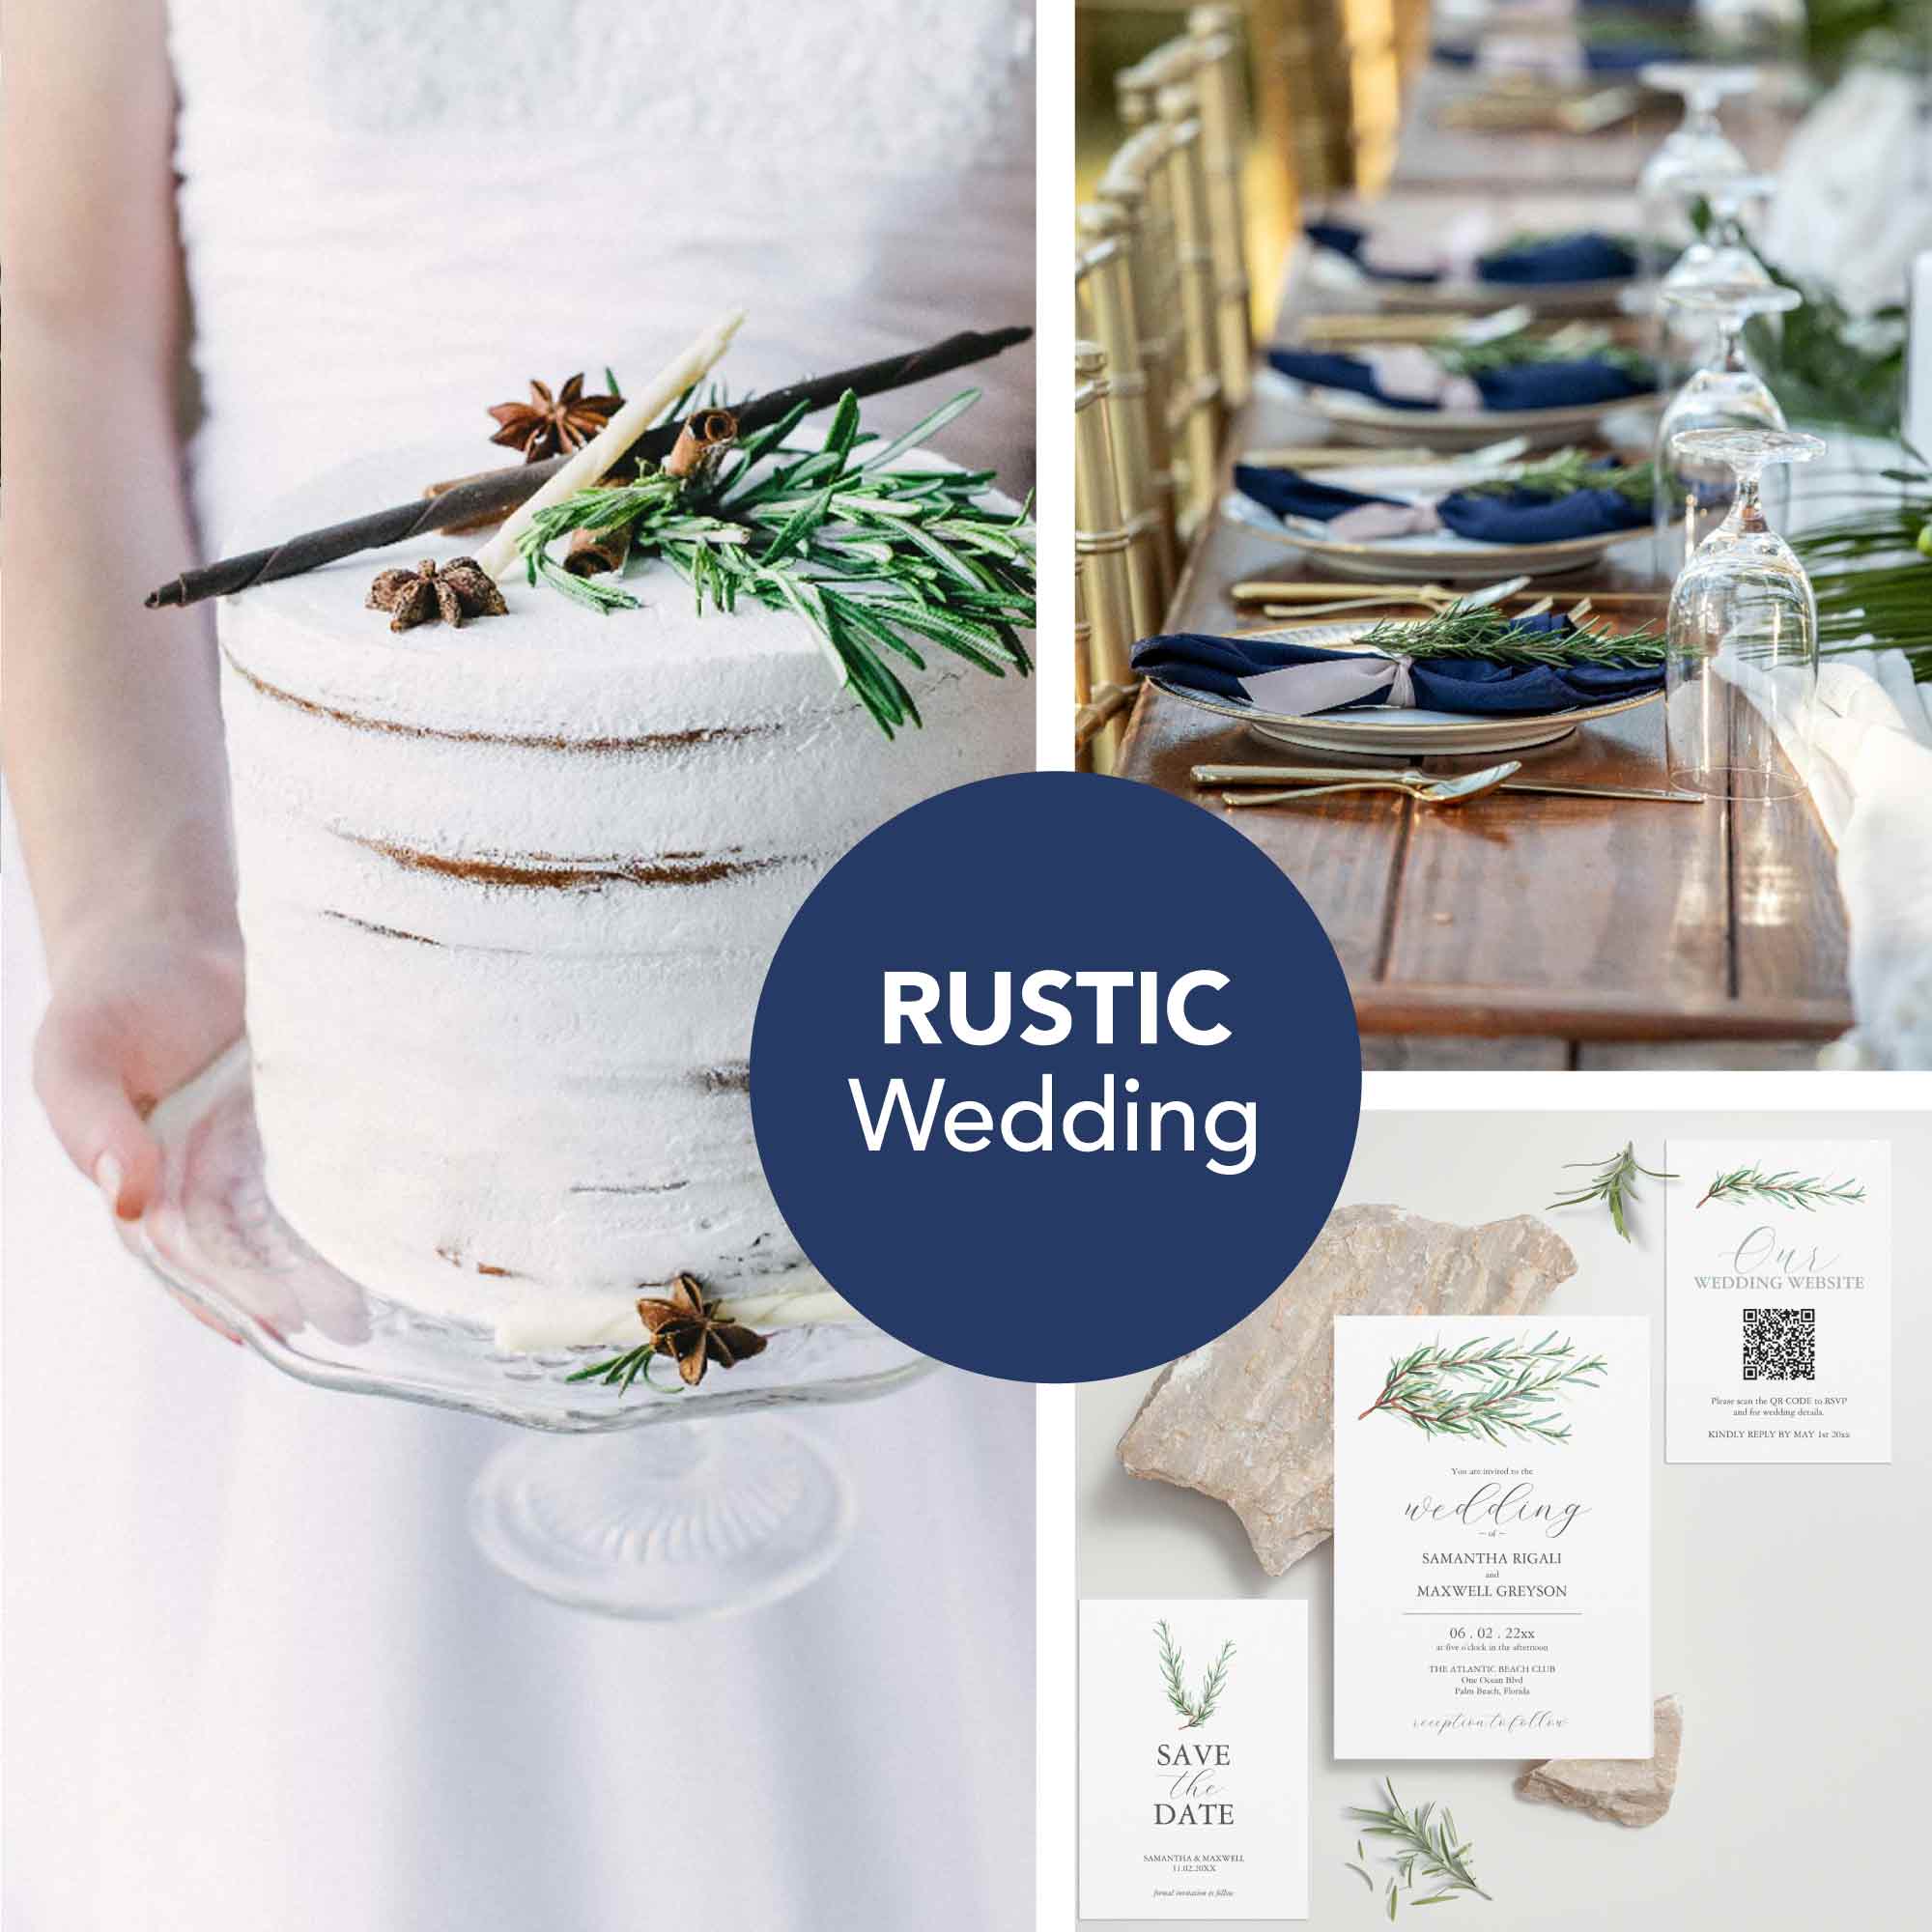 Plan your dream wedding with a charming rustic wedding theme. Discover rustic elegance, decor ideas, and more for your special day!